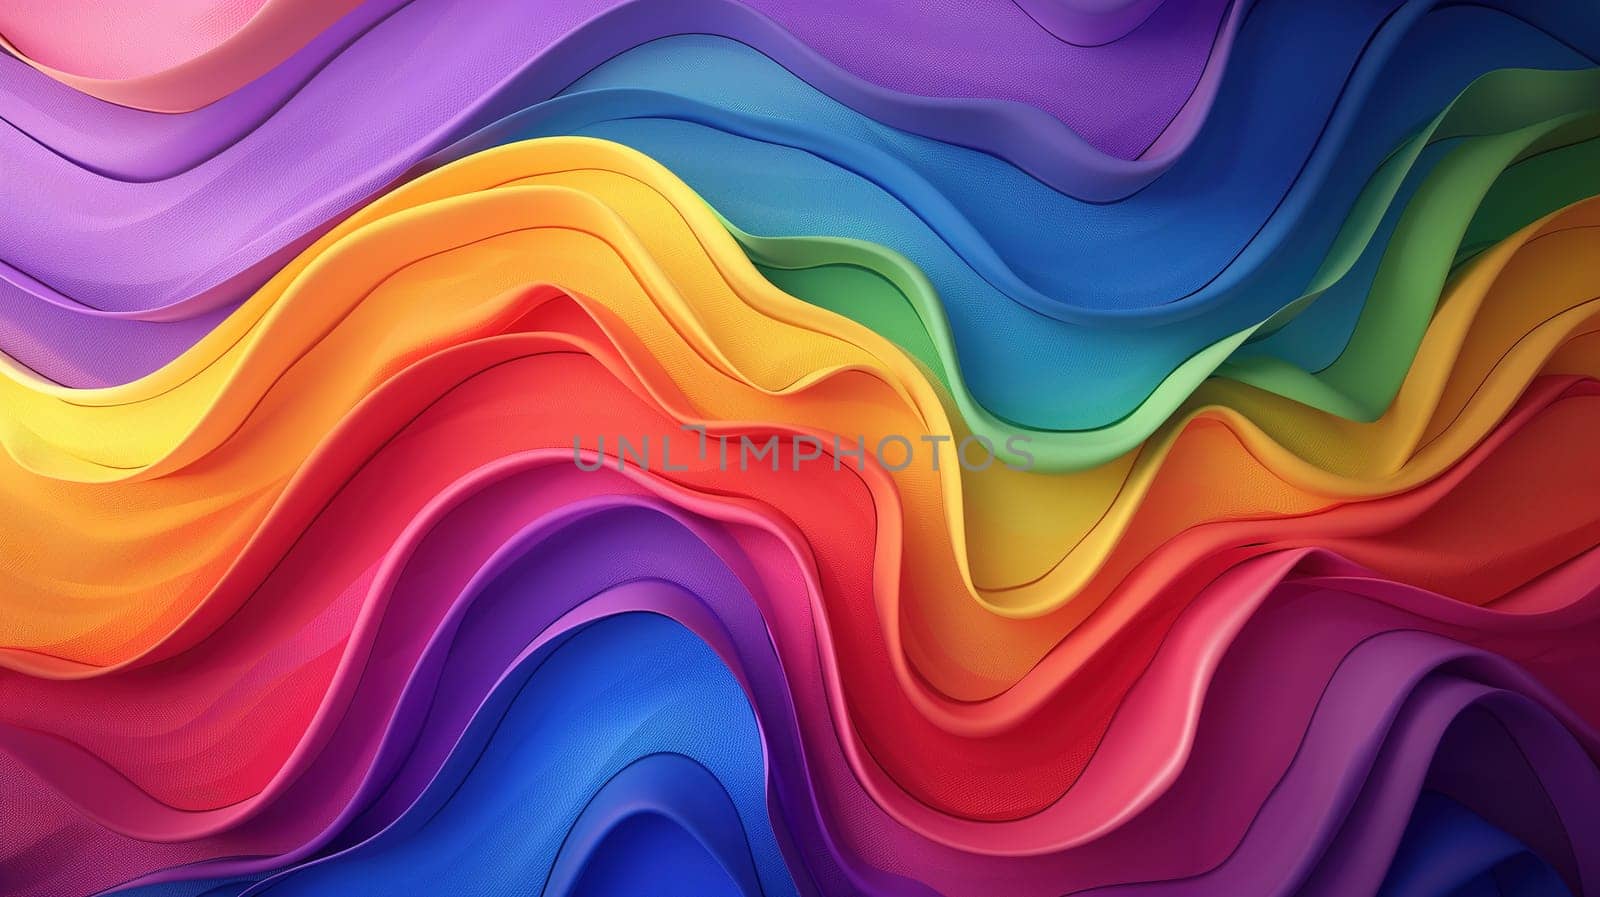 A colorful background featuring a variety of bright hues with wavy lines that create a dynamic and energetic visual effect. The blend of colors and waves gives a sense of movement and liveliness.